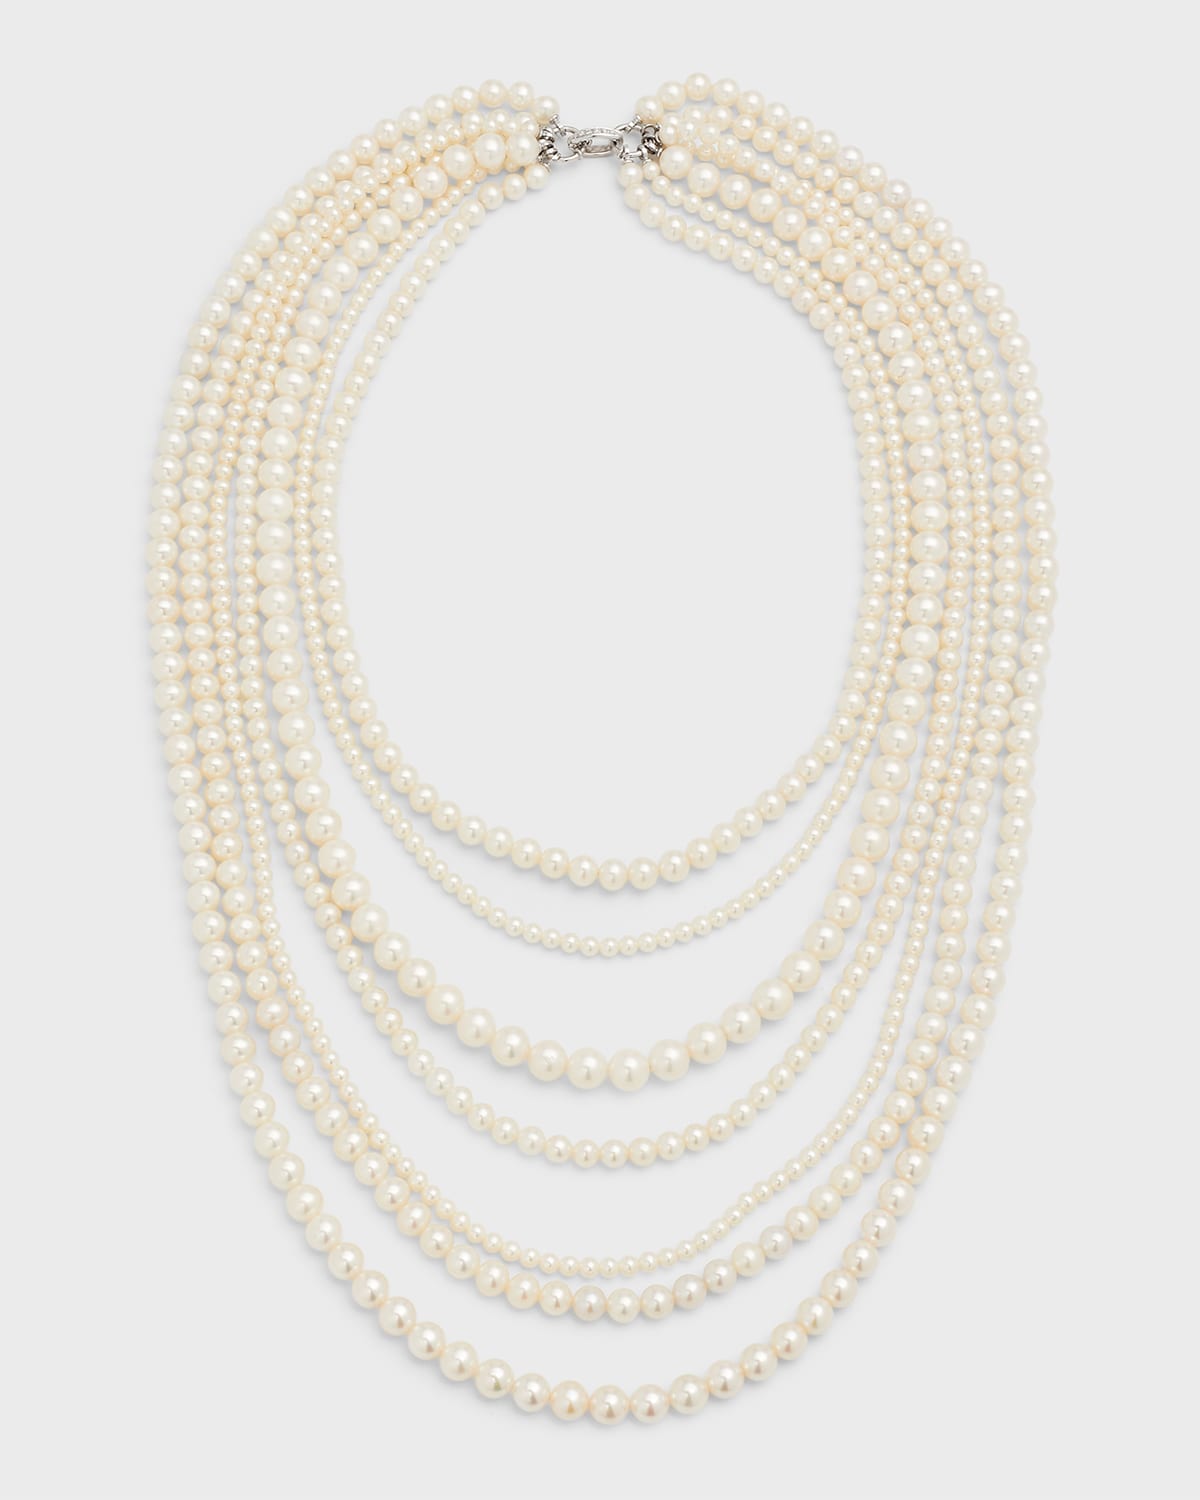 Utopia 18k White Gold Necklace With Freshwater Pearls, 3.5-8.5mm